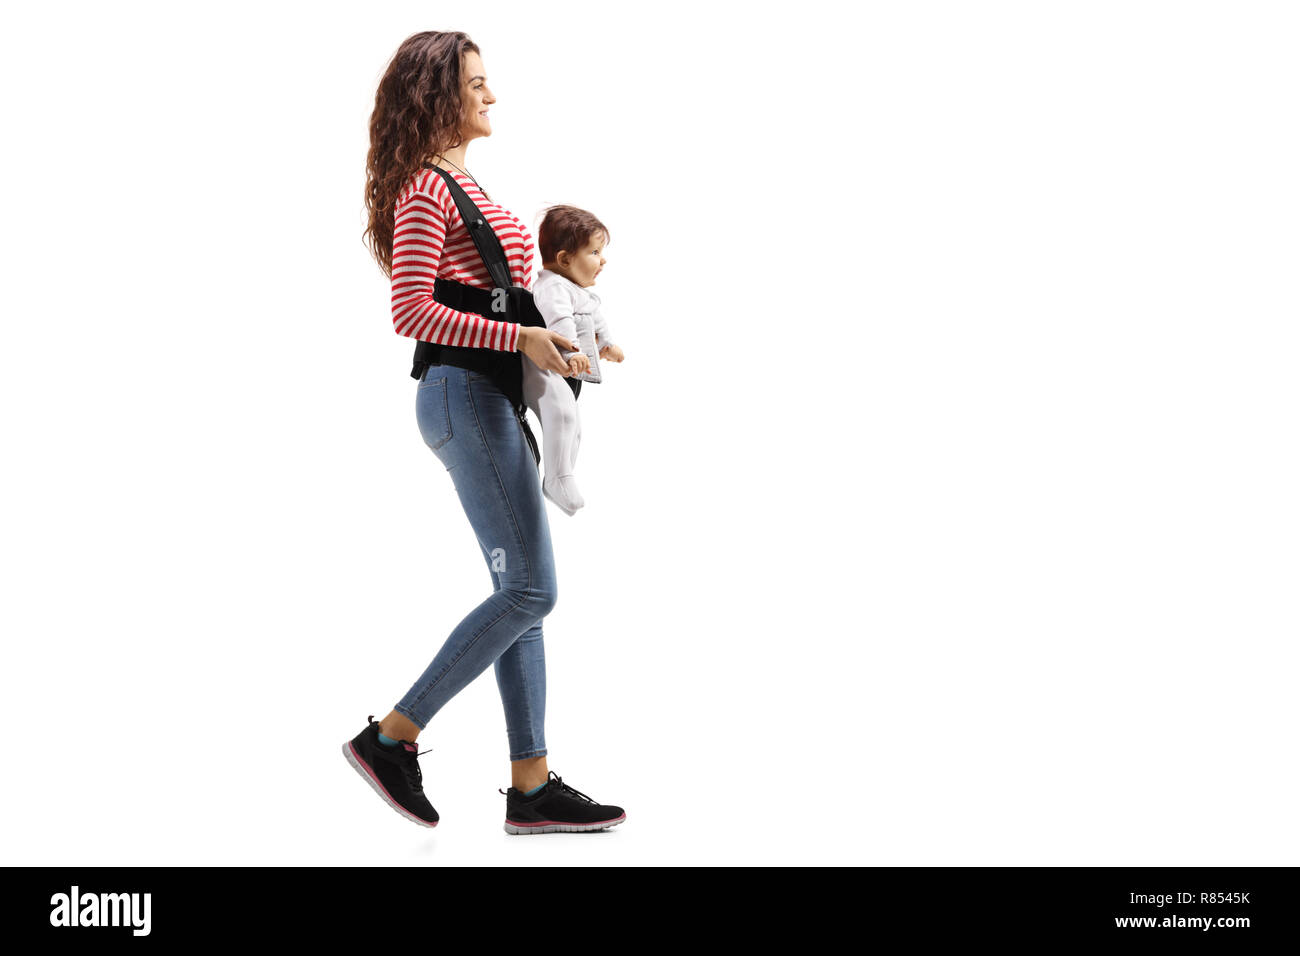 Full length shot of a young mother with a baby in a carrier walking isolated on white background Stock Photo